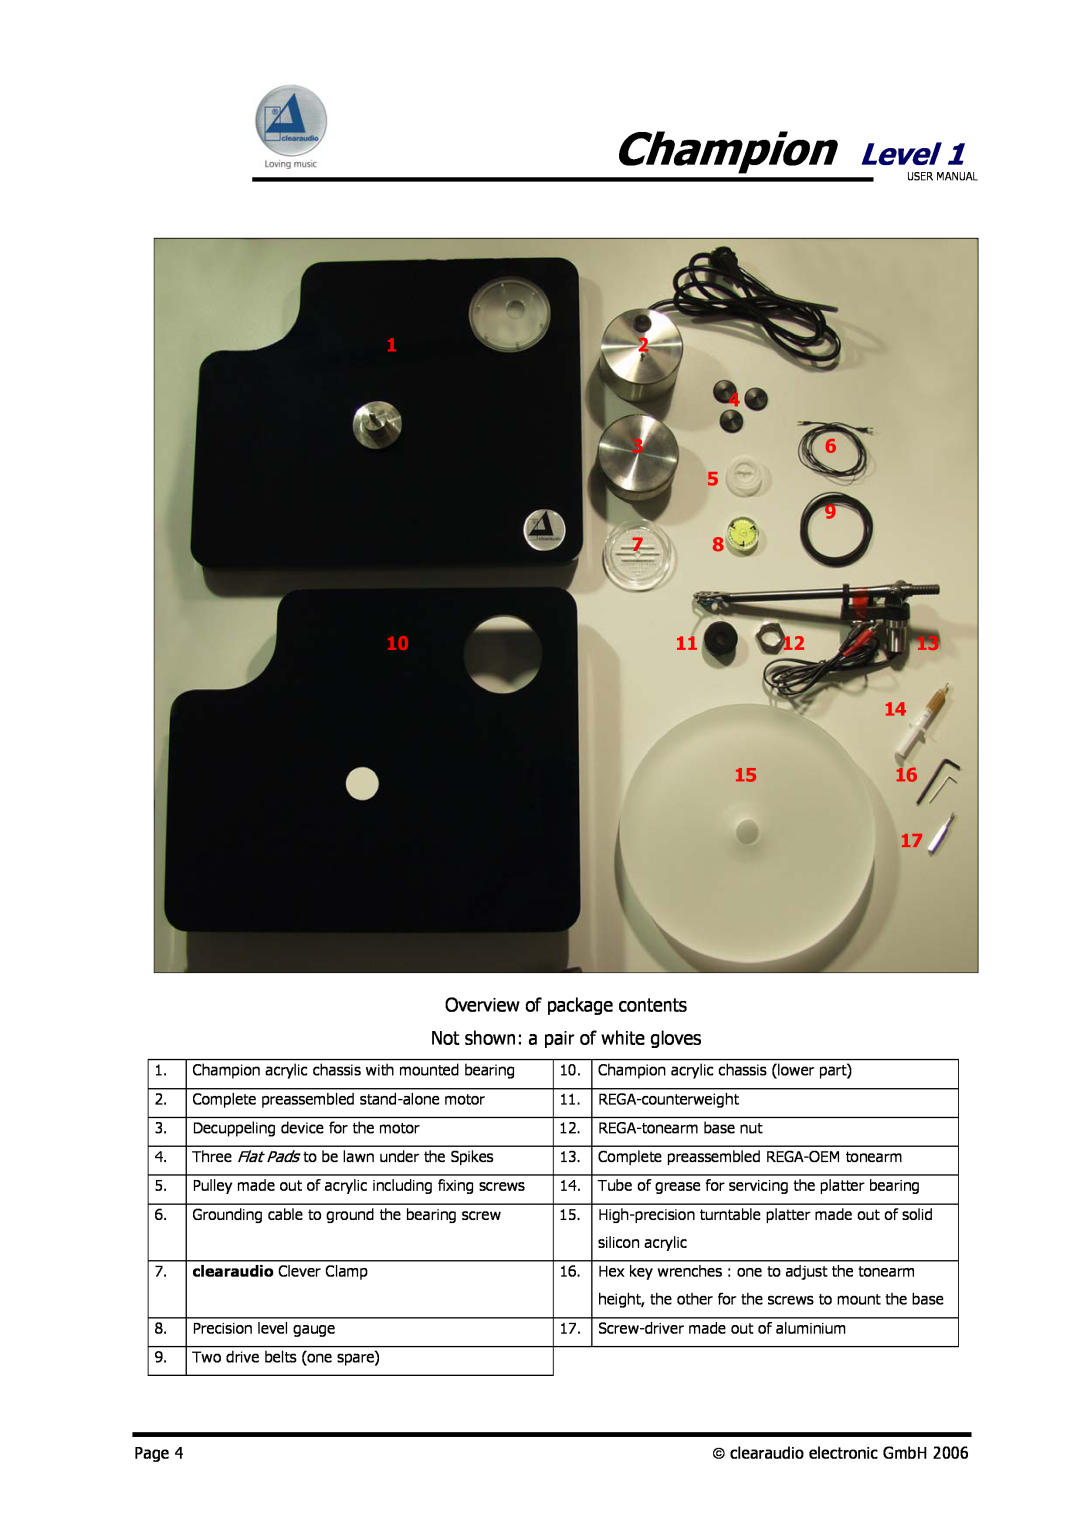 Clearaudio user manual Champion Level, Overview of package contents, Not shown a pair of white gloves, Page 